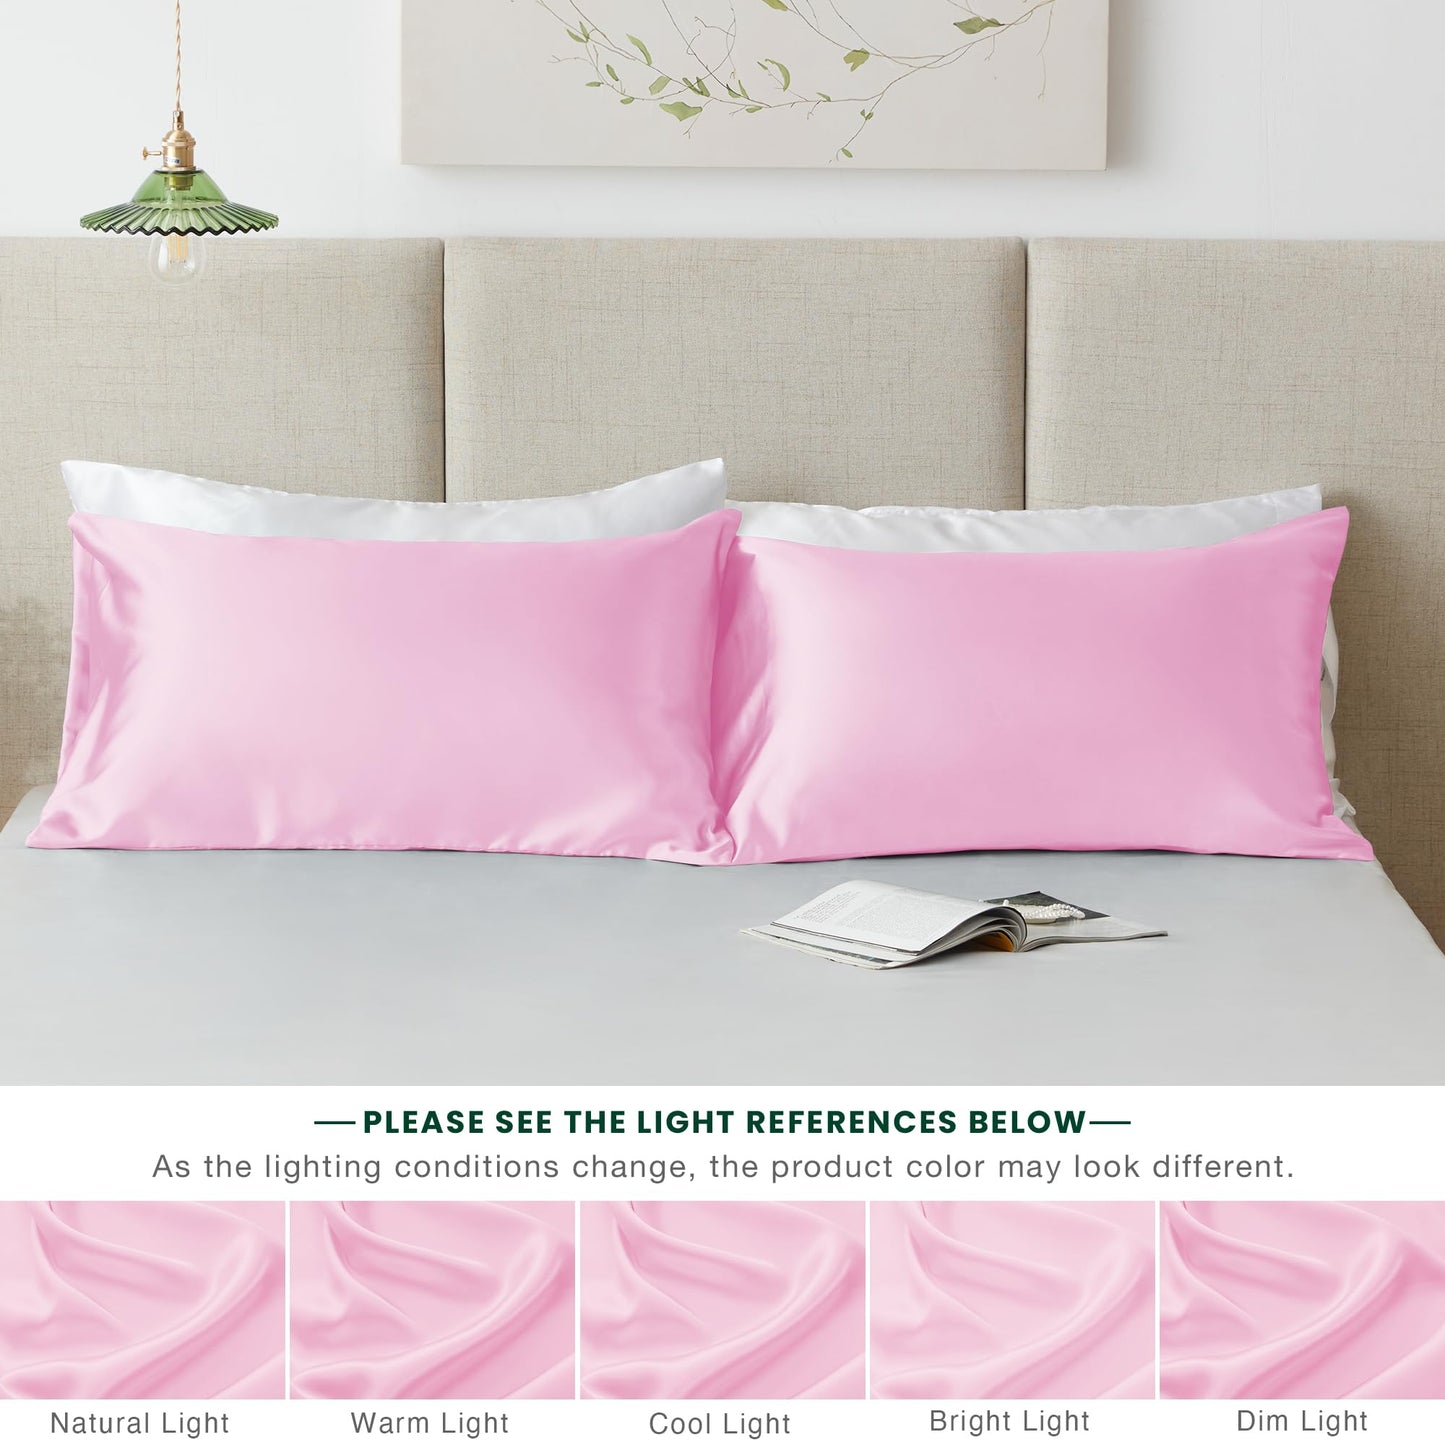 Love's cabin Silk Satin Pillowcase for Hair and Skin (Pink, 20x36 inches) Slip King Size Pillow Cases Set of 2 - Satin Cooling Pillow Covers with Envelope Closure